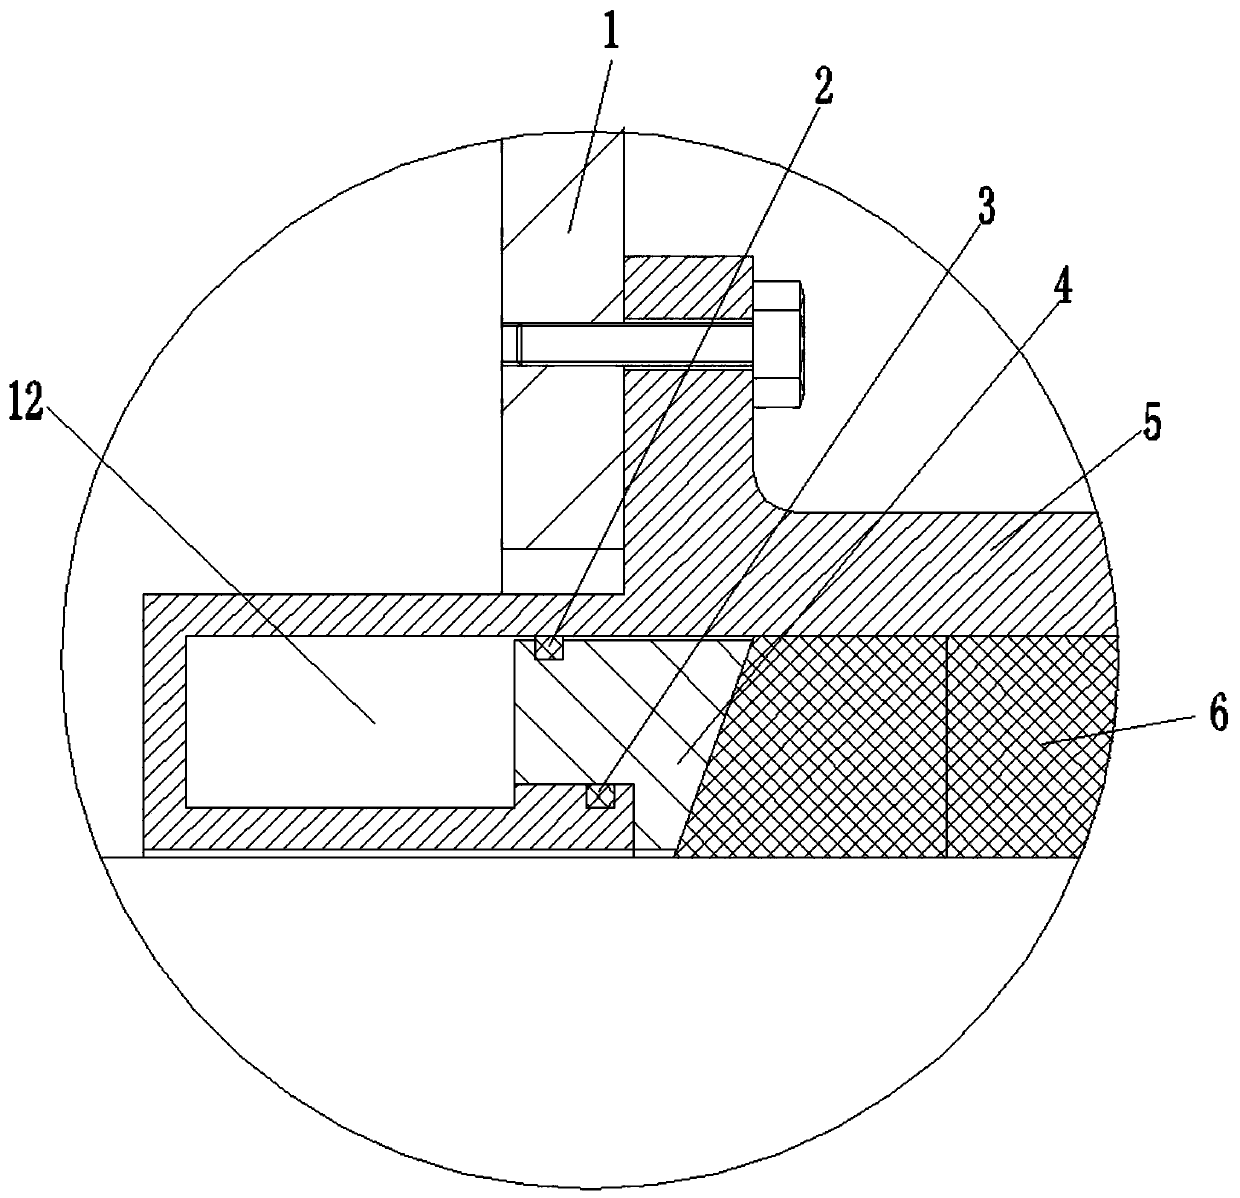 Thermal force compression sealing device